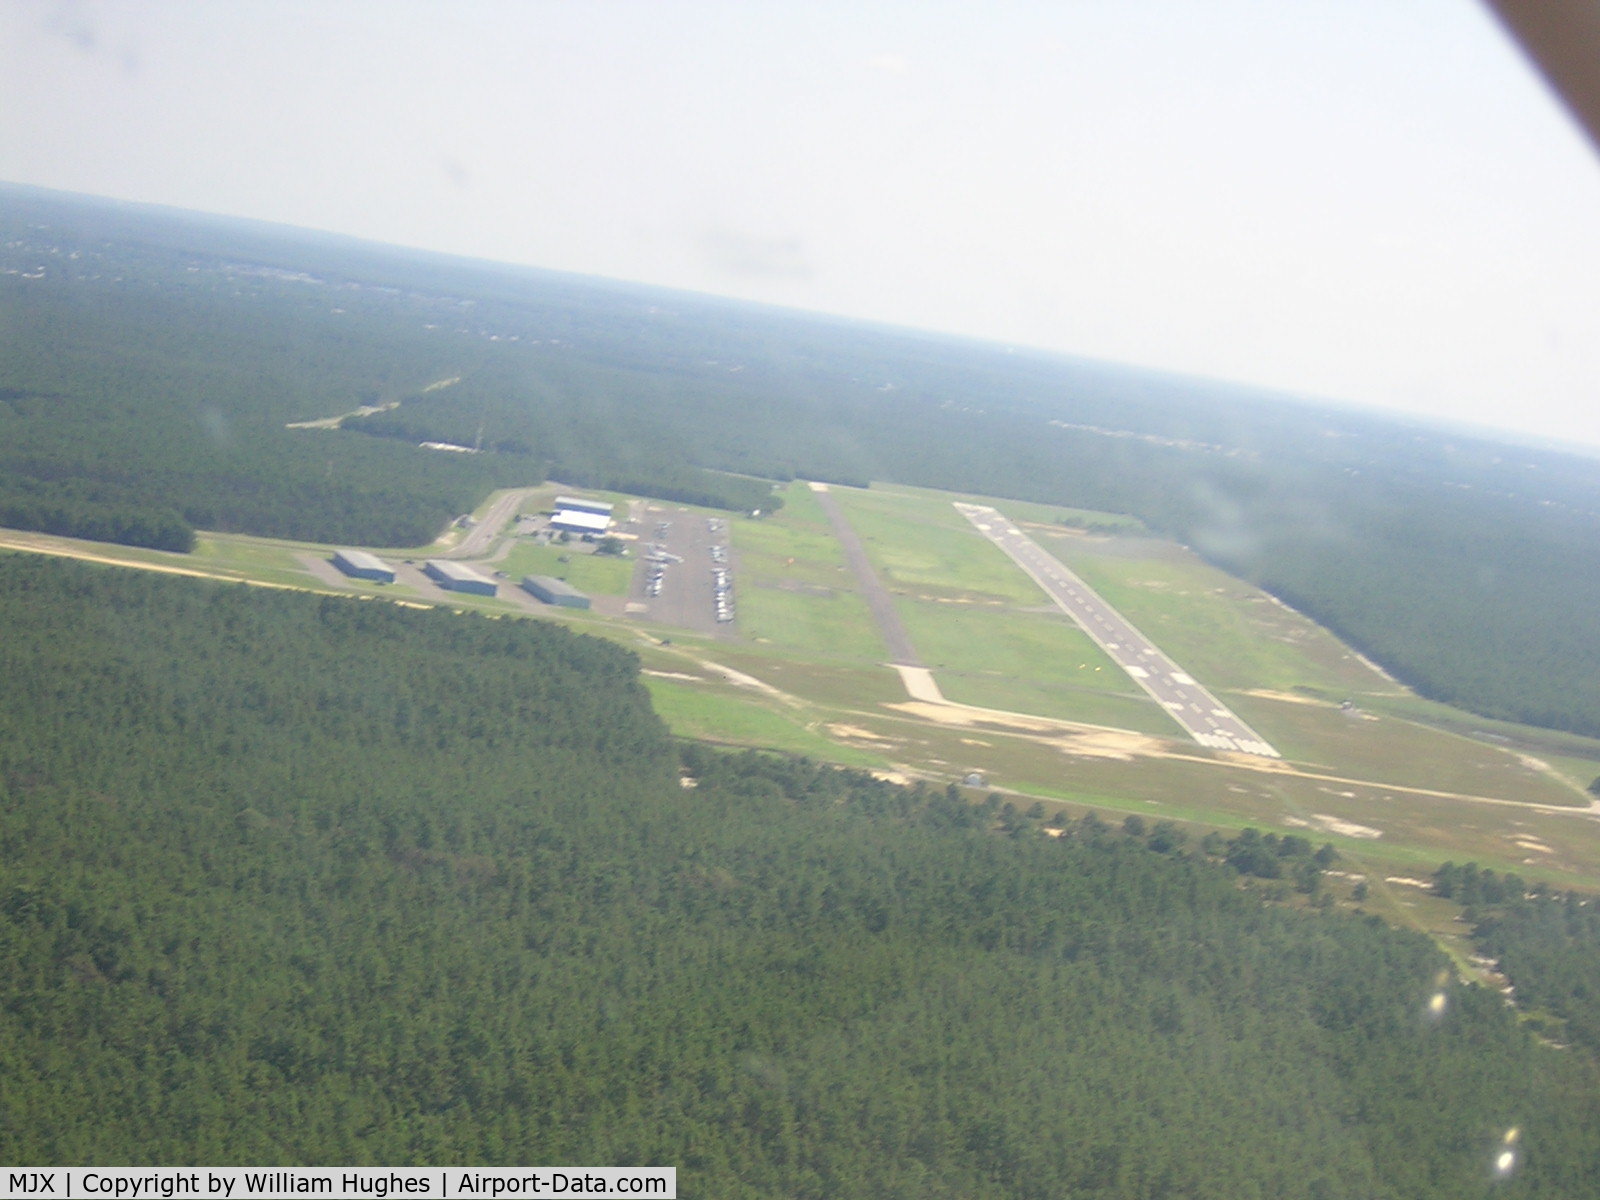 Ocean County Airport (MJX) - shart turn from my Citation